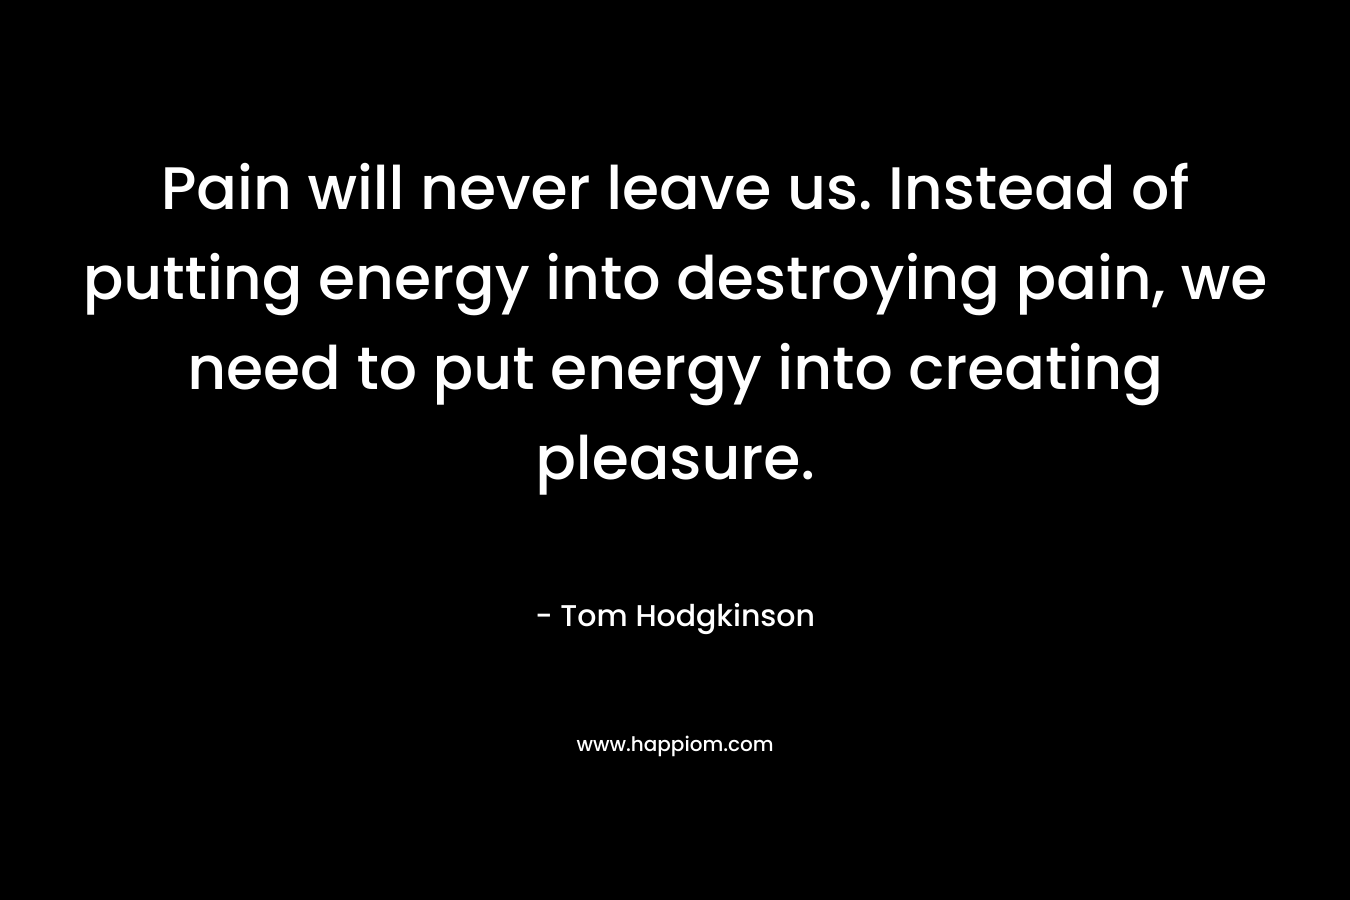 Pain will never leave us. Instead of putting energy into destroying pain, we need to put energy into creating pleasure.